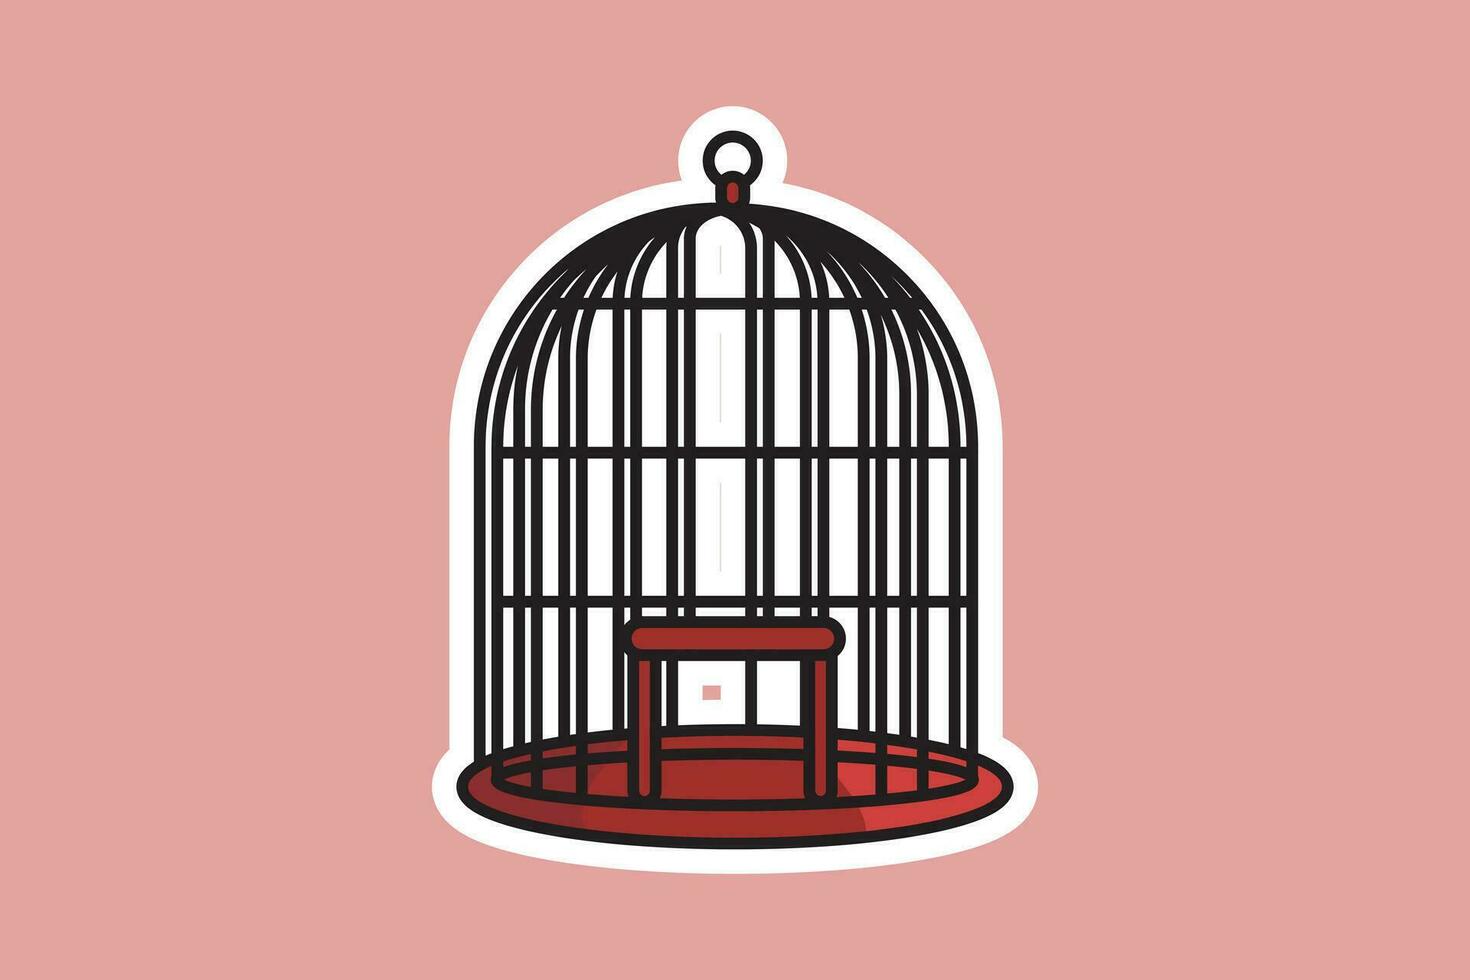 Birdcage with Open Door sticker design vector illustration. Animal nature object icon concept. Birdcage sticker design logo.